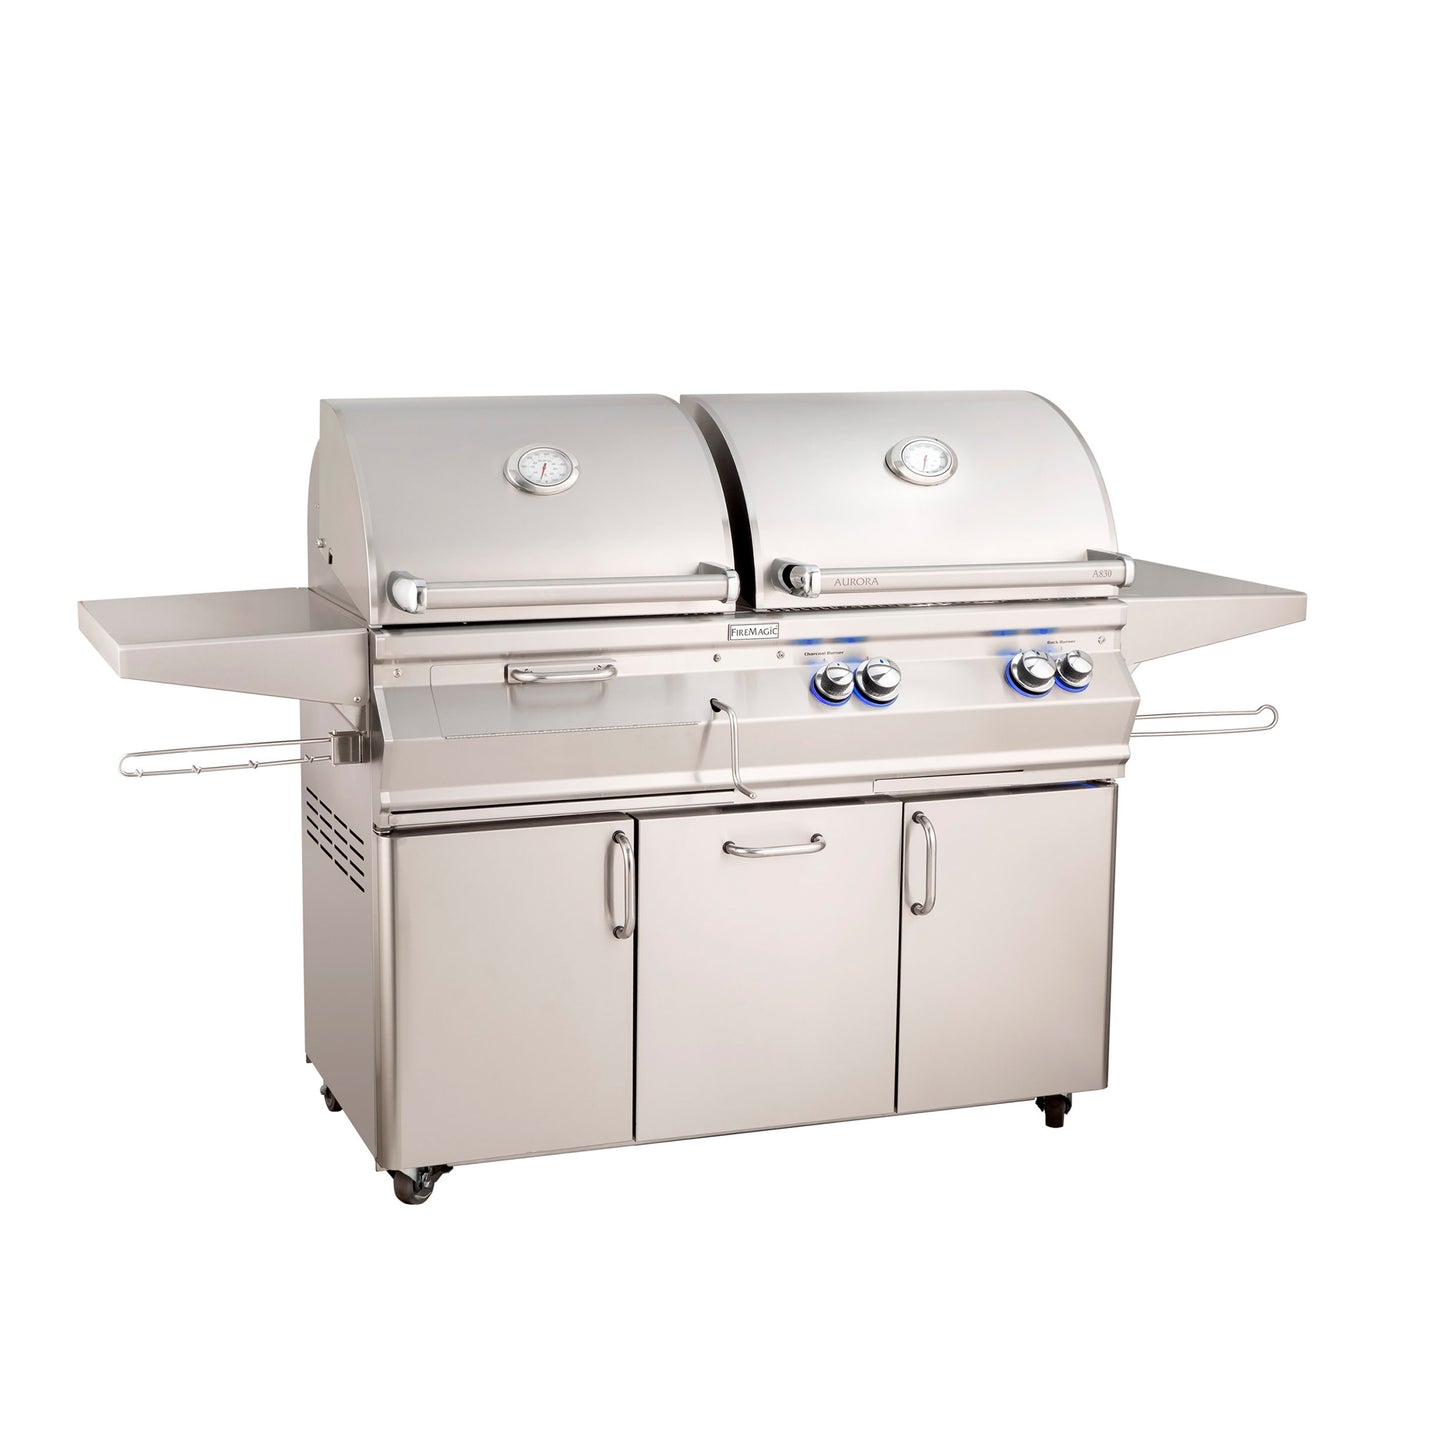 Fire Magic 46-Inch Aurora A830s Portable Gas/Charcoal Combo Grill